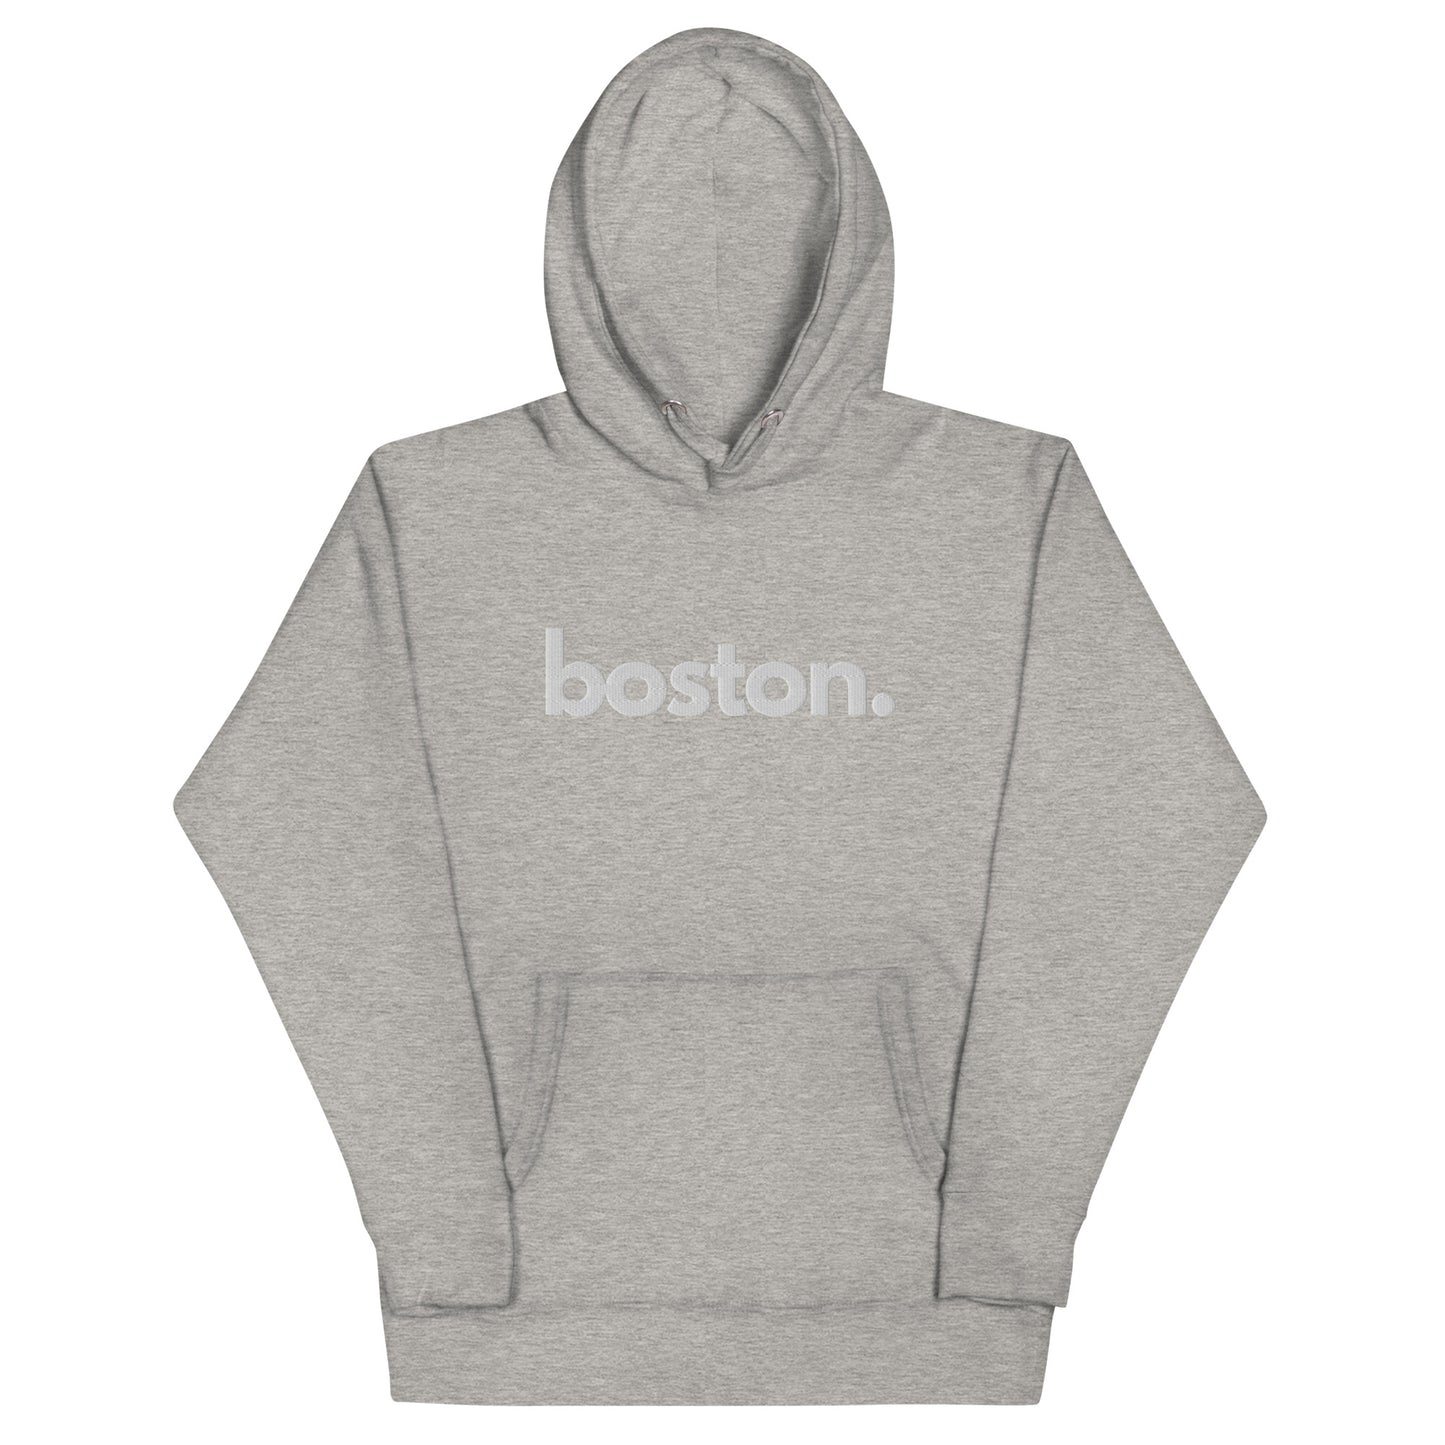 boston. Embroidered Hoodie